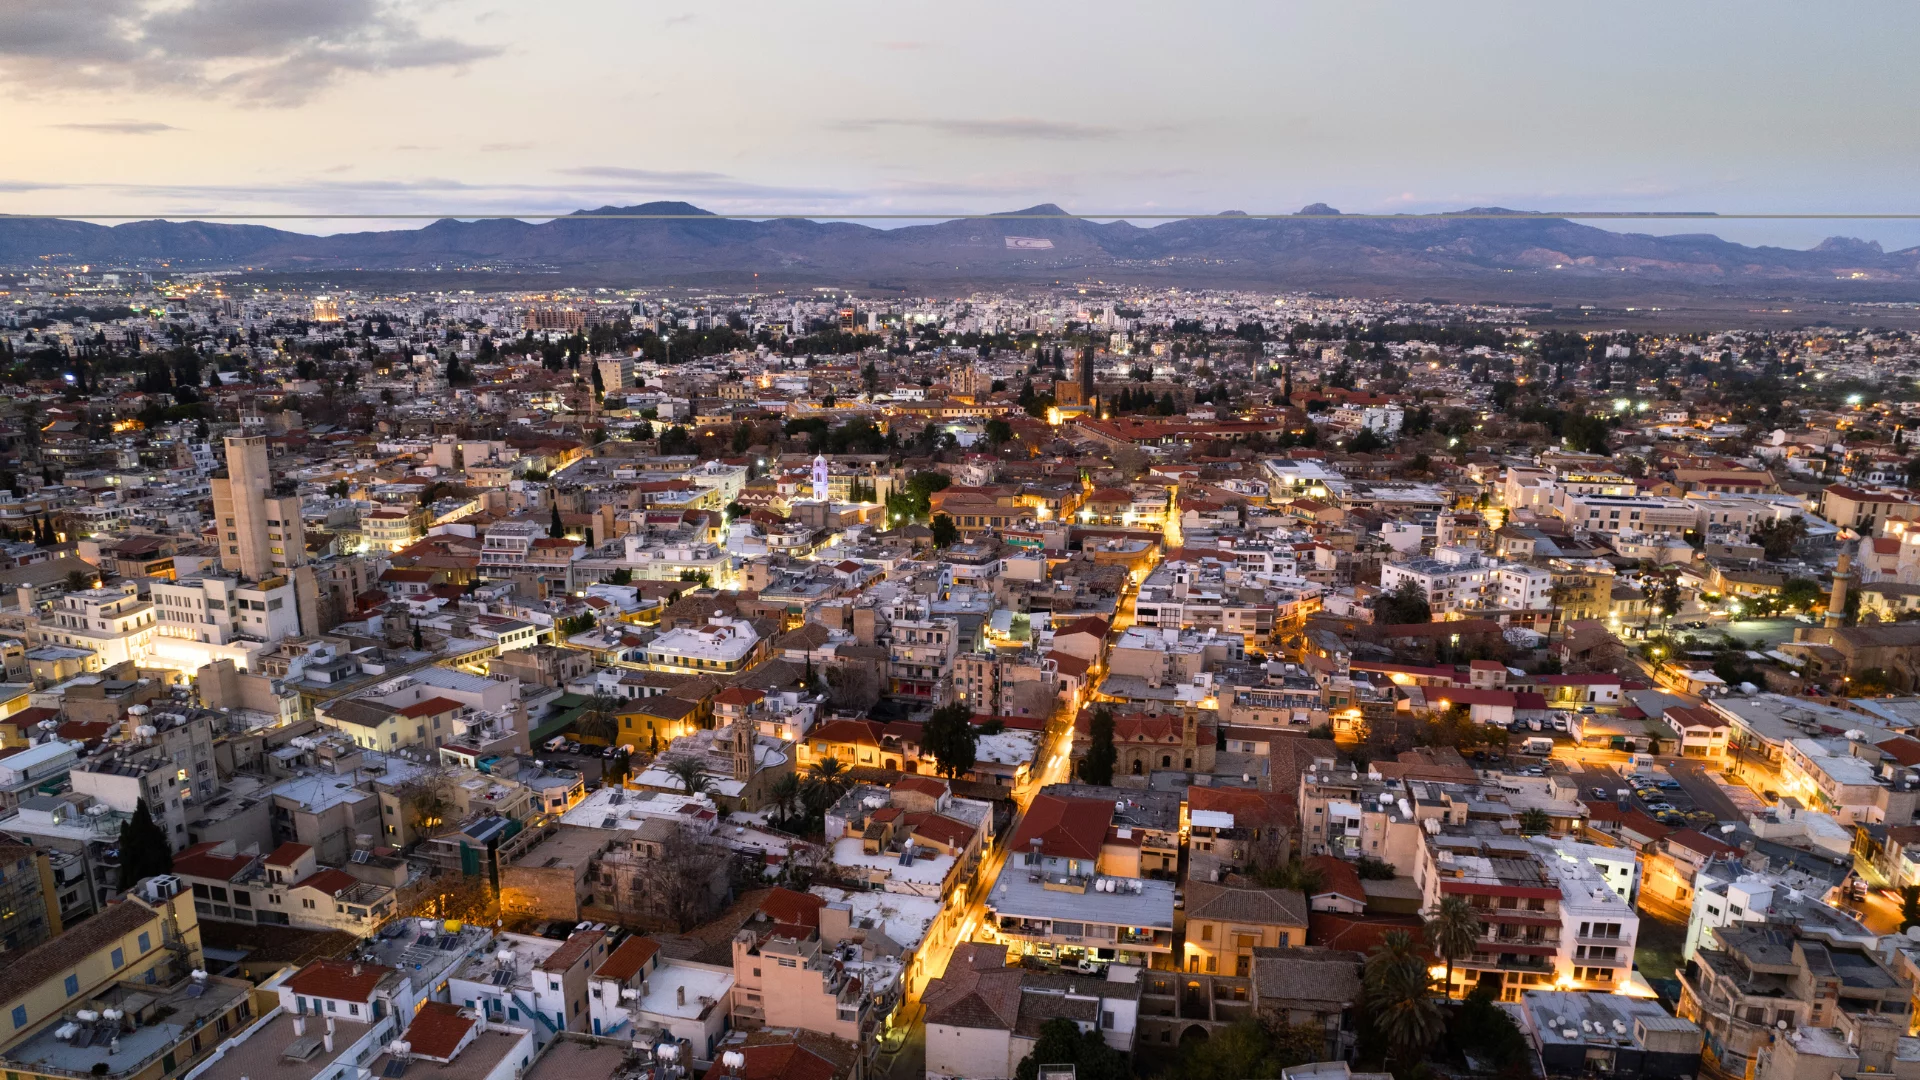 Panorama of the city of Nicosia, view from above